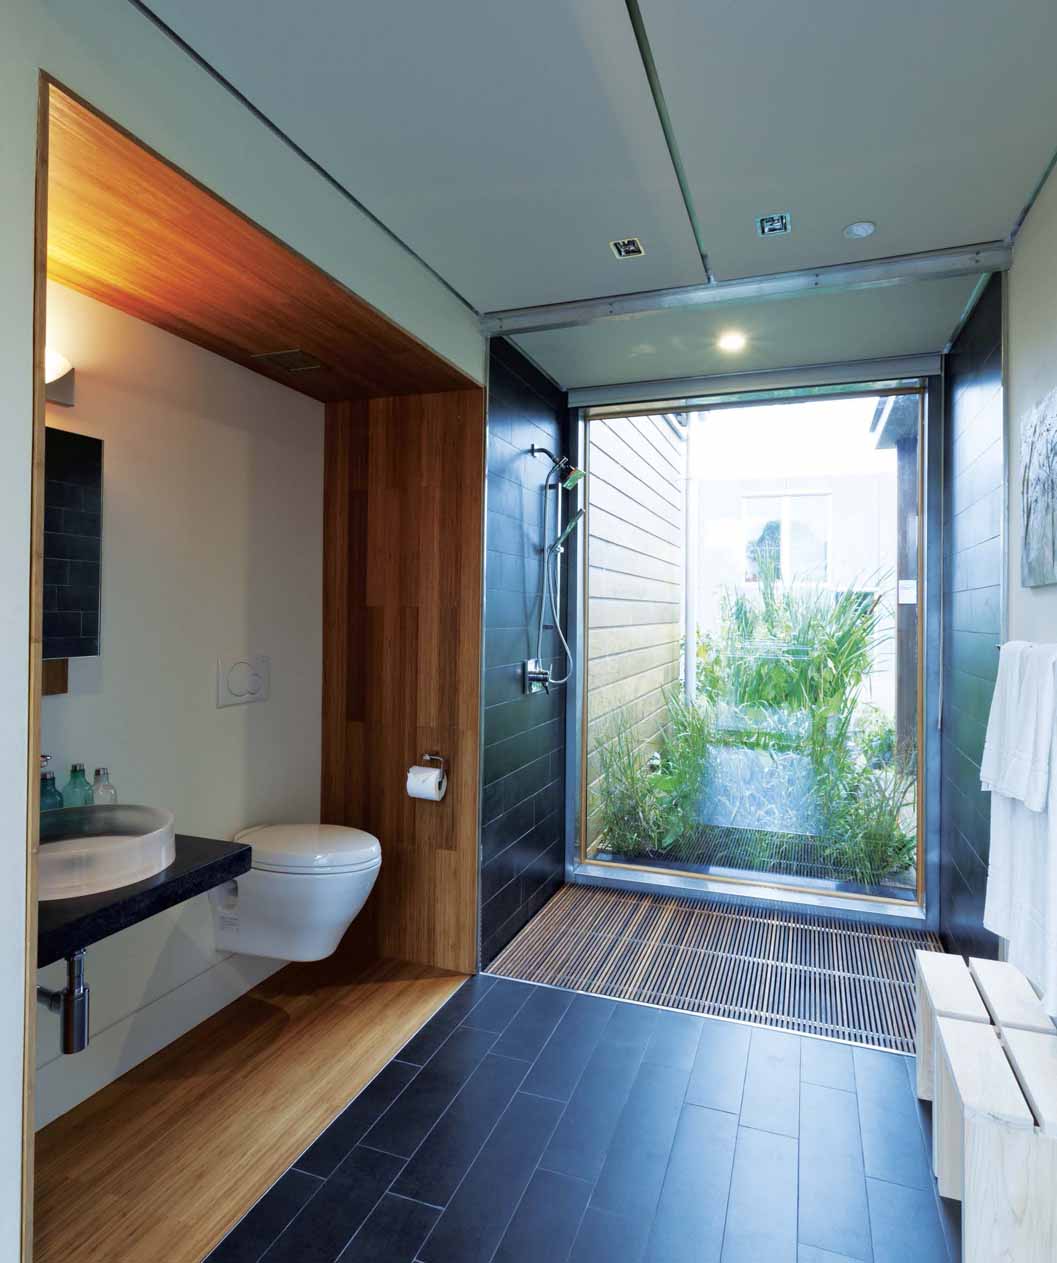 The bathroom is the focal point of the design and water conservation and reuse is a central theme to the project.